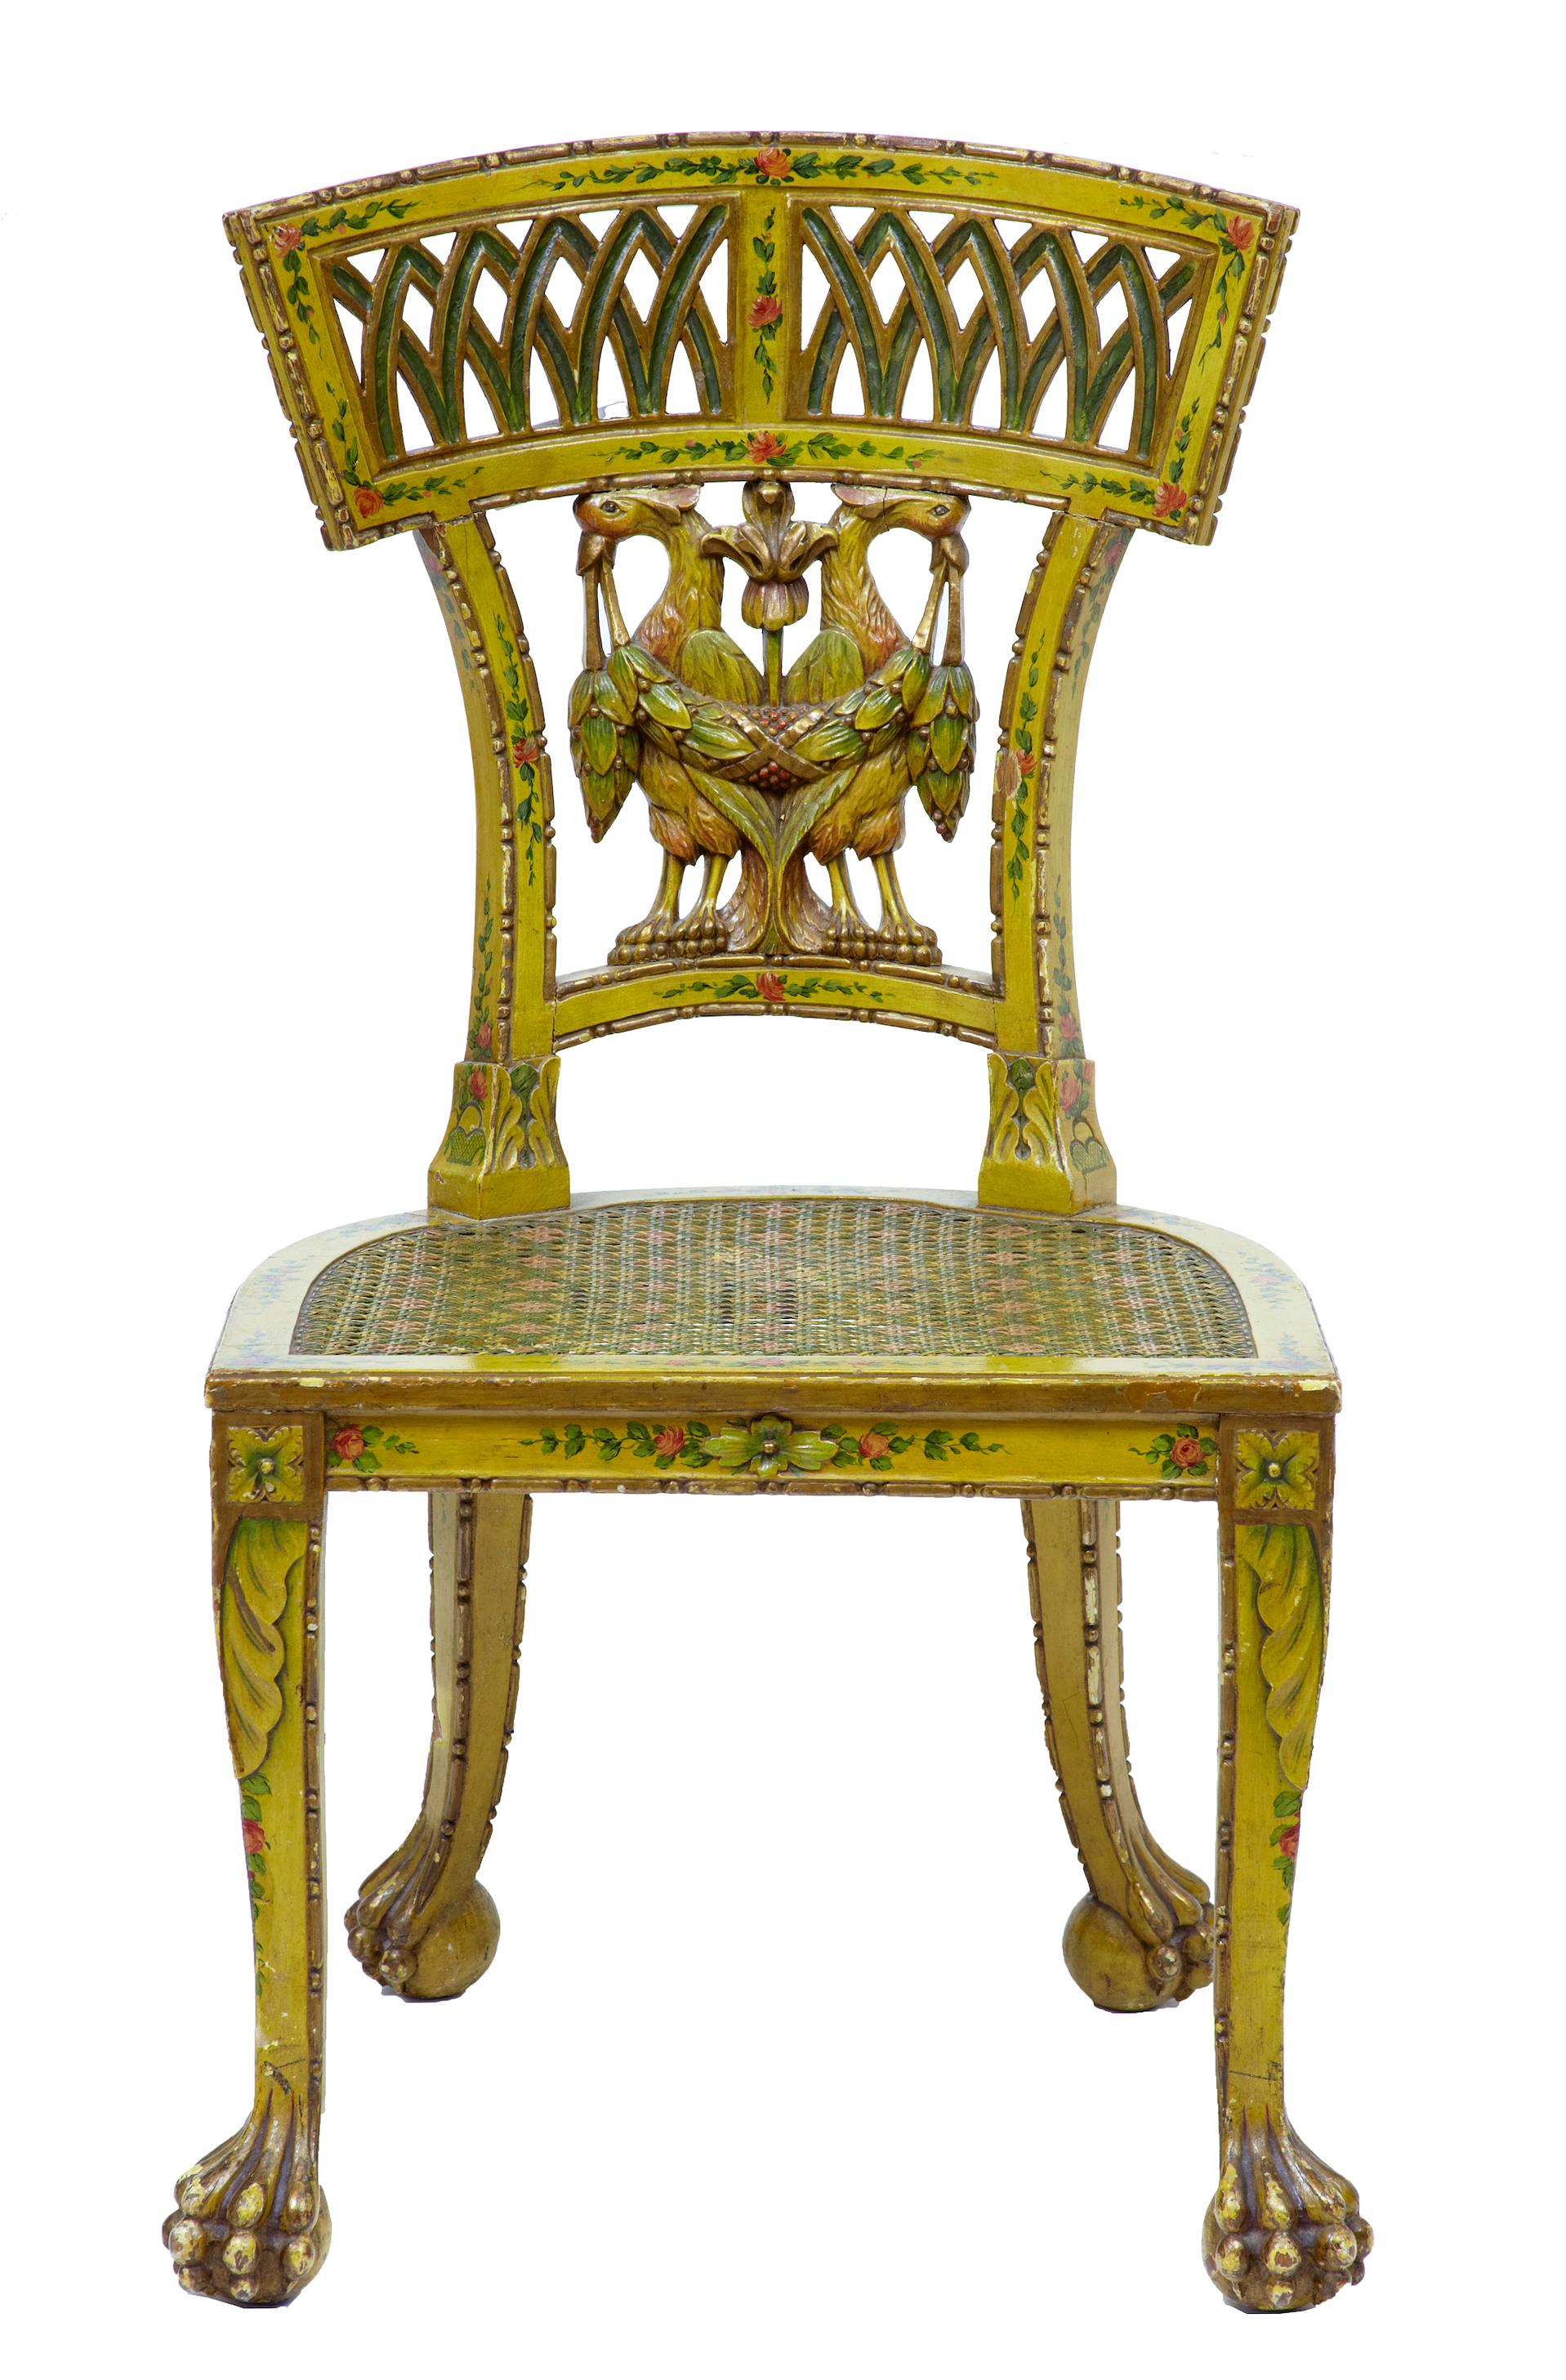 19th century Biedermeier carved and painted cane chair circa 1800.

A fine example of early Austrian Biedermeier furniture. Shaped backrest with pierced detailing, main feature being the germanic coat of arms in the backrest. Chair is beautifully